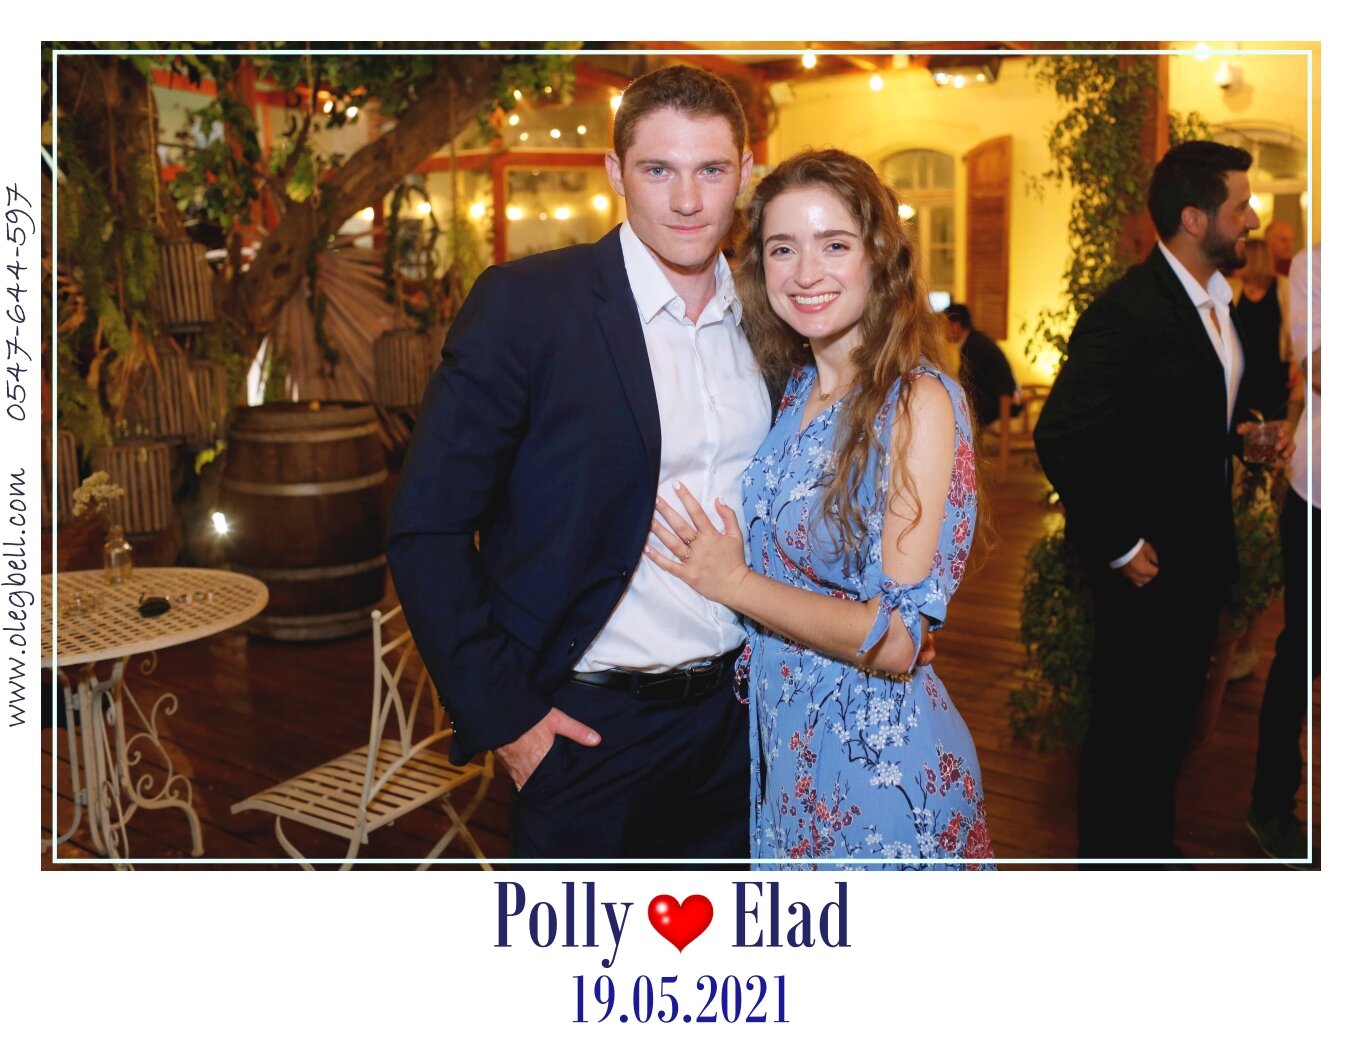 POLLY_AND_ELAD_WD_MG_SITE_013.JPG